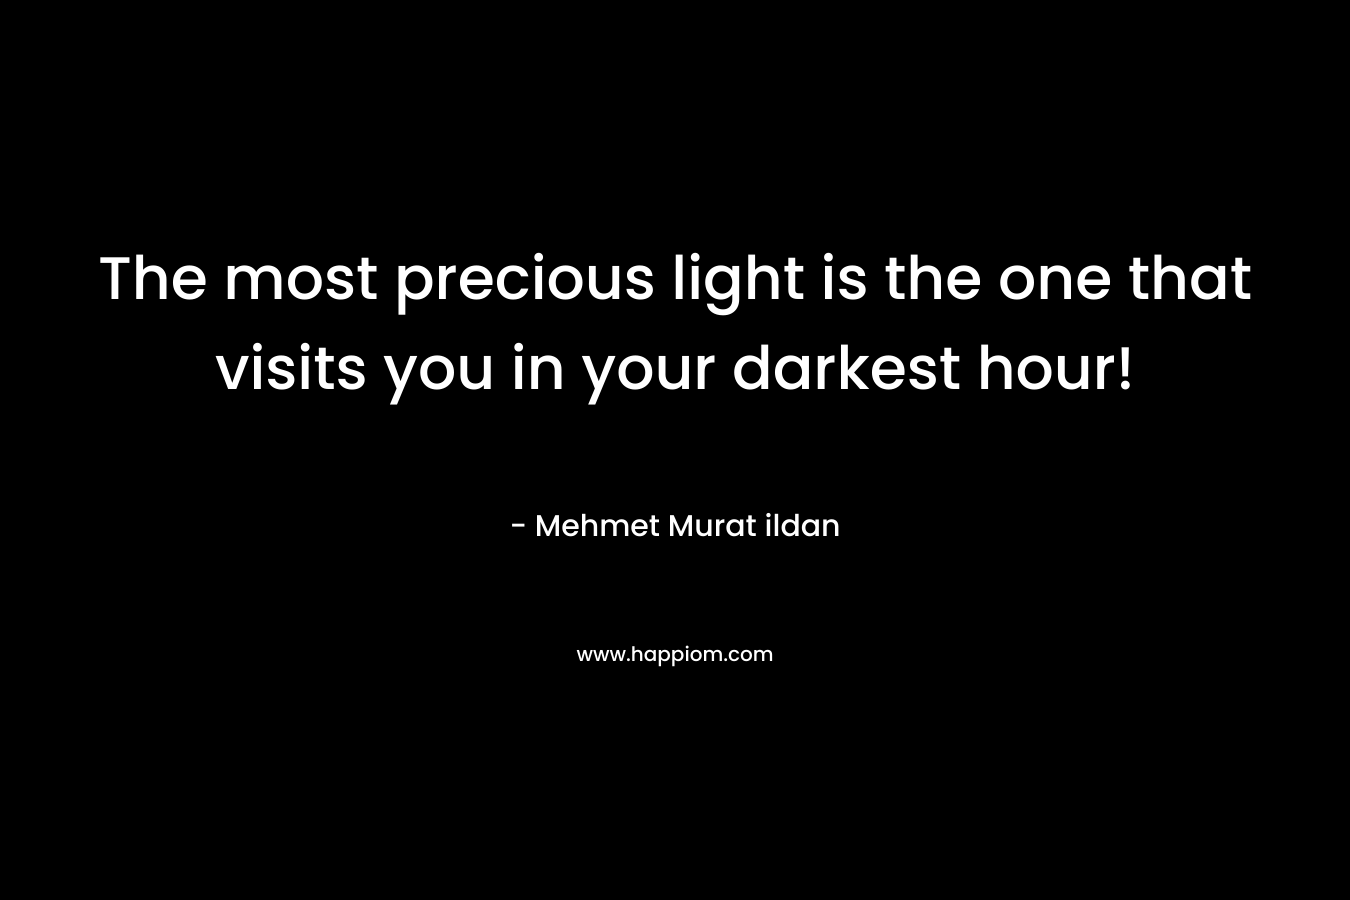 The most precious light is the one that visits you in your darkest hour!